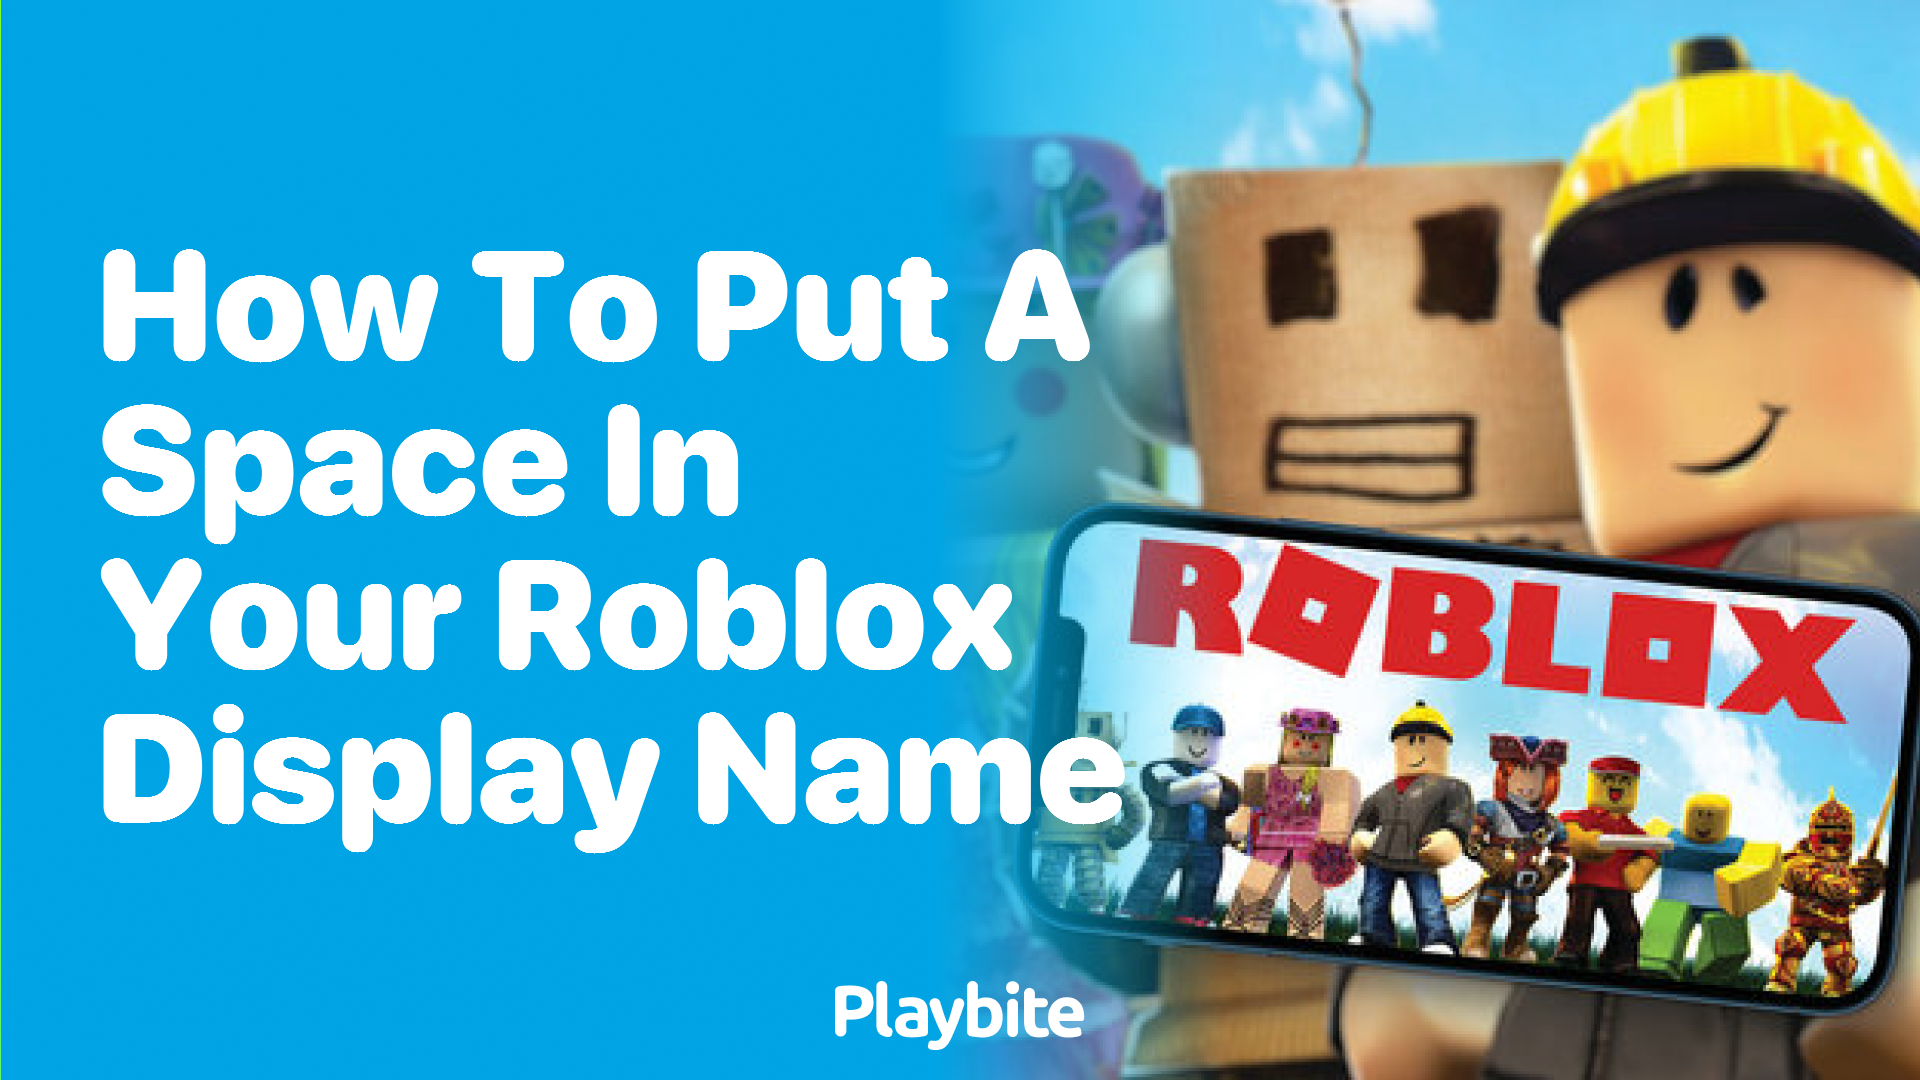 How to Put a Space in Your Roblox Display Name